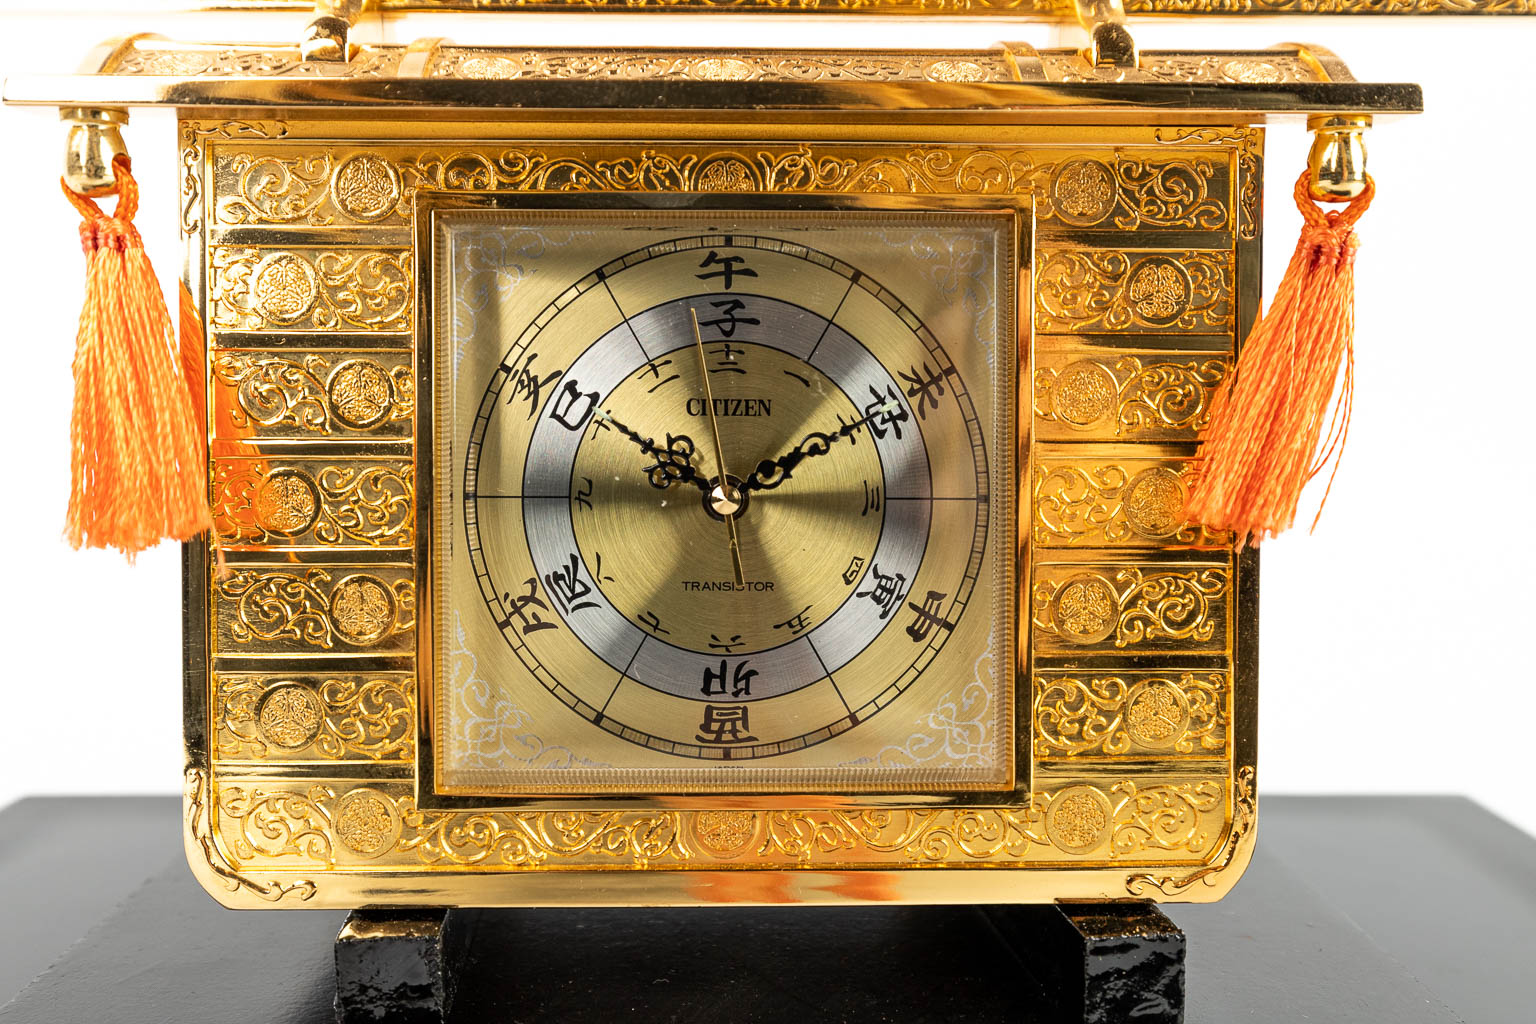 A collection of 2 clocks in Oriental style made by Citizen. (H:32cm)